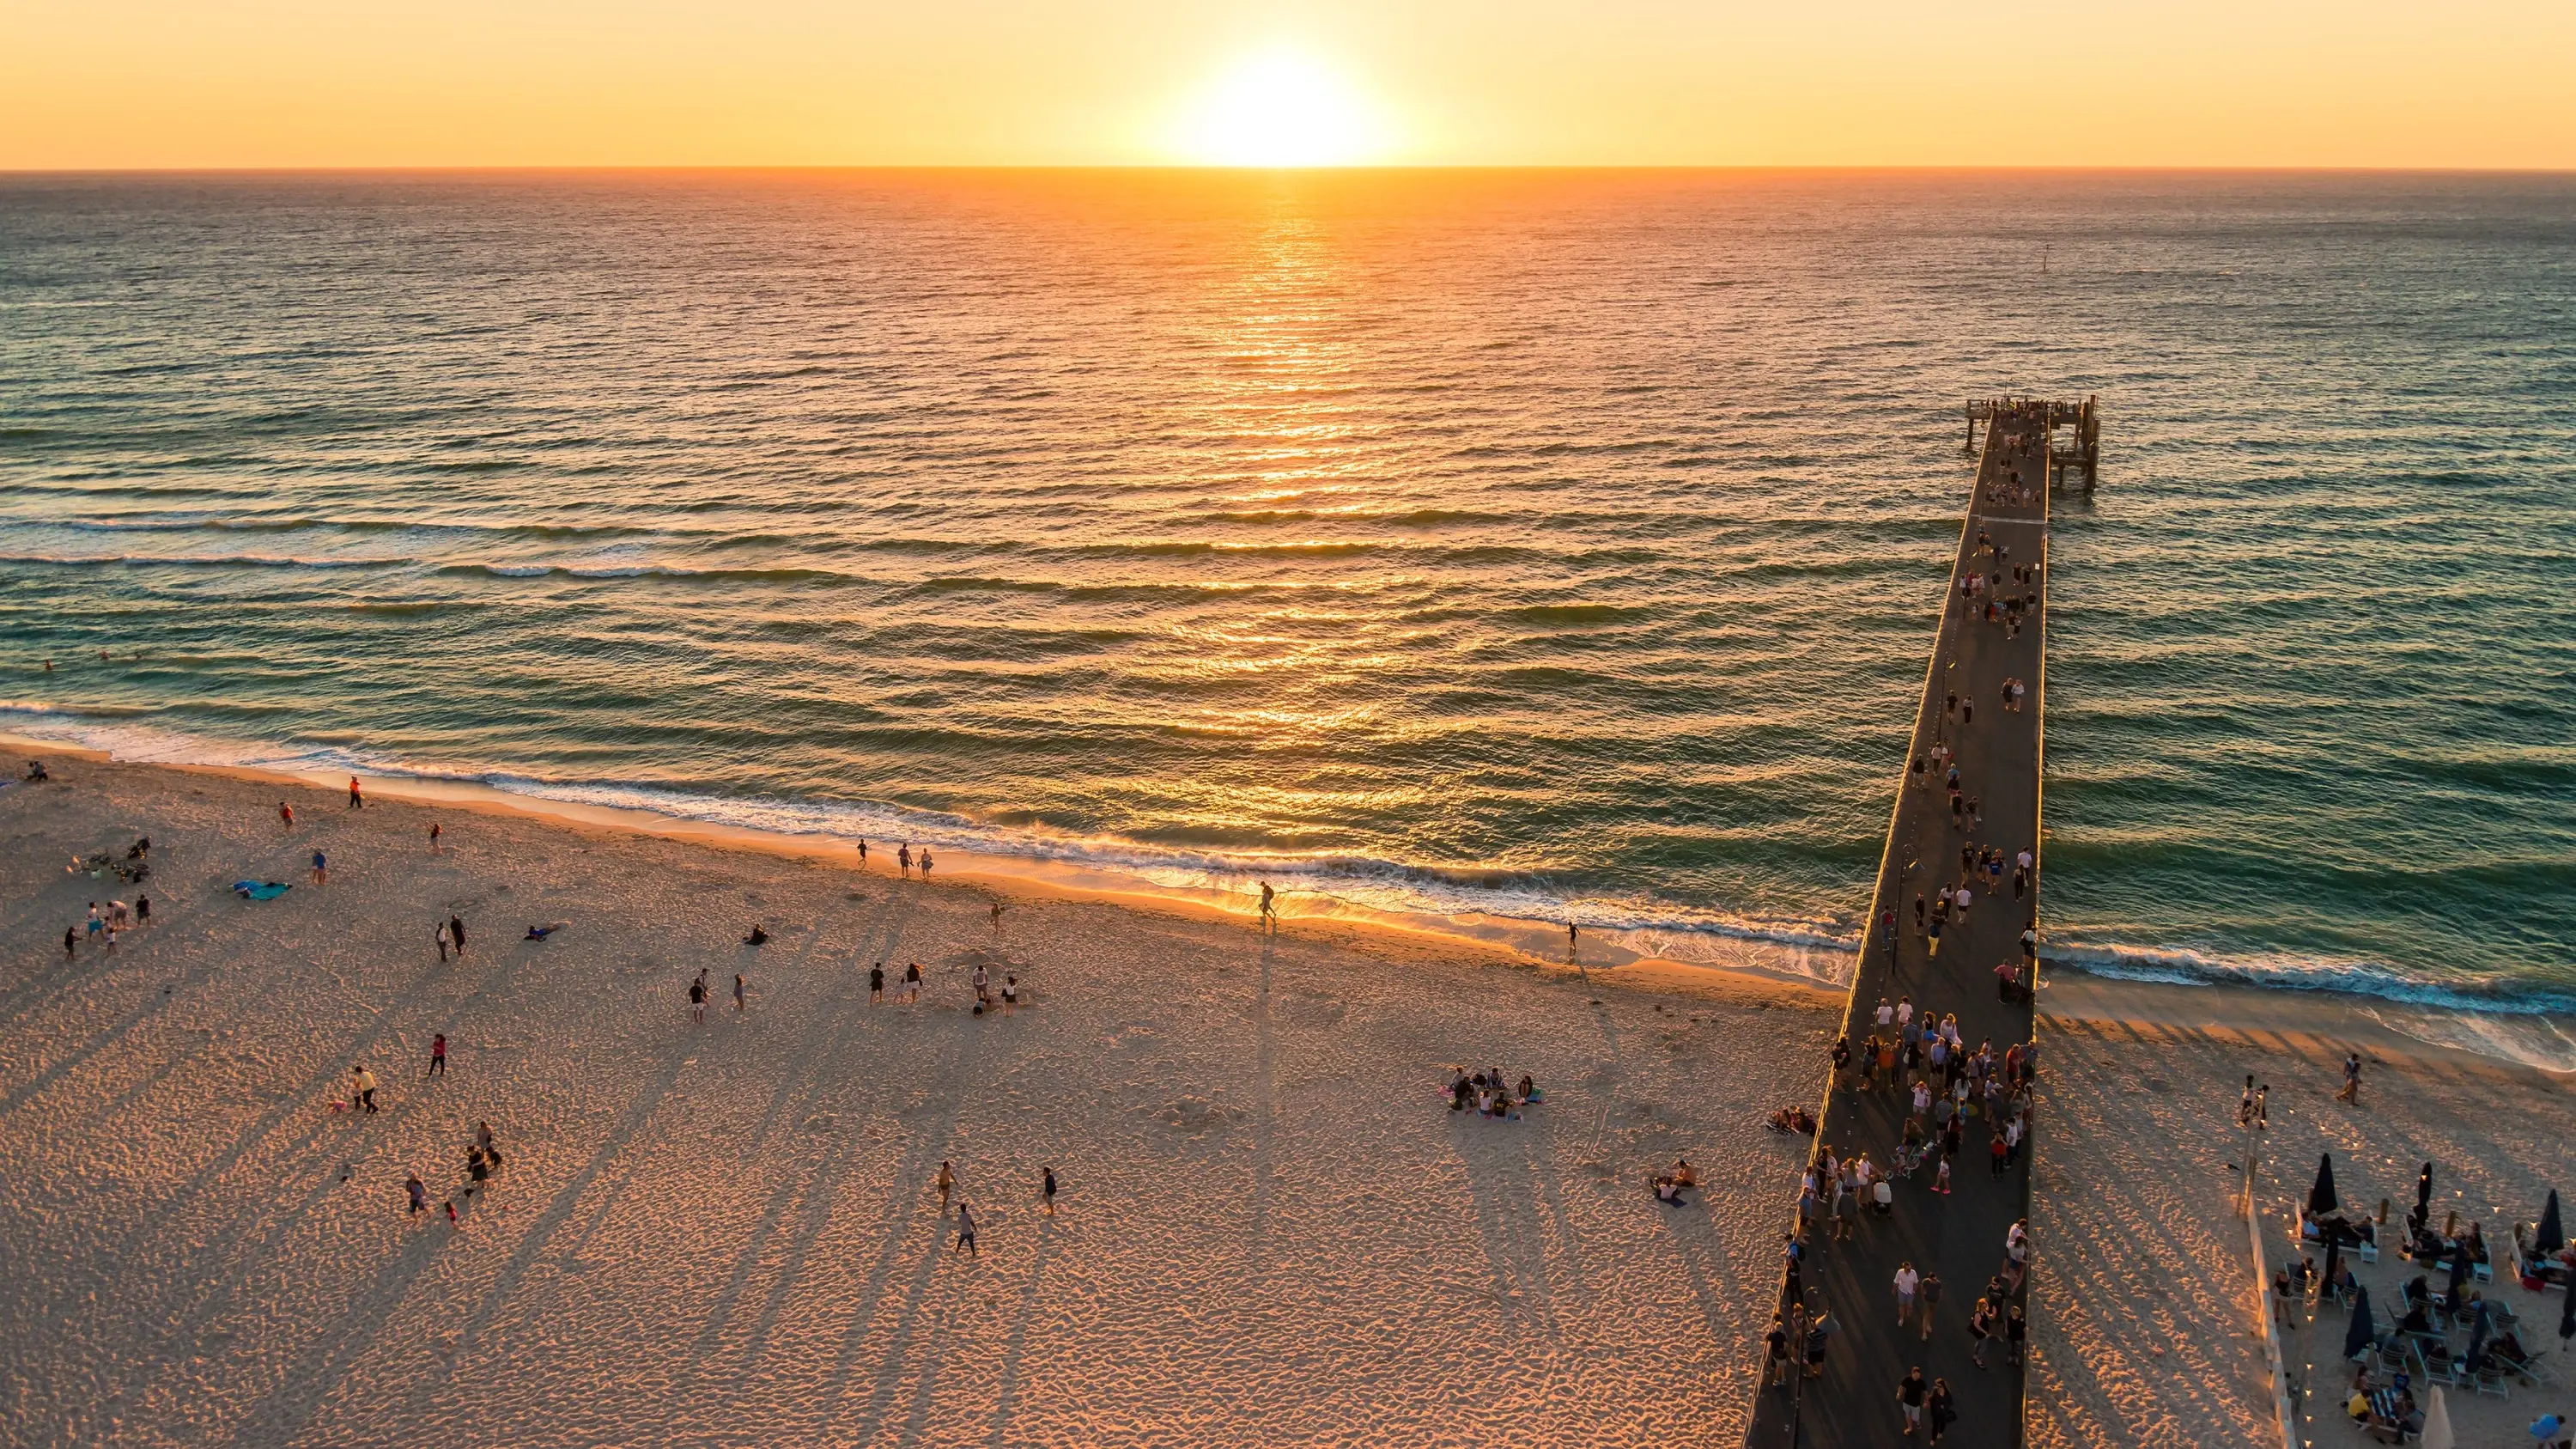 Aerial view of Glenelg Beach and jetty at sunset. Image credit: stock.adobe.com